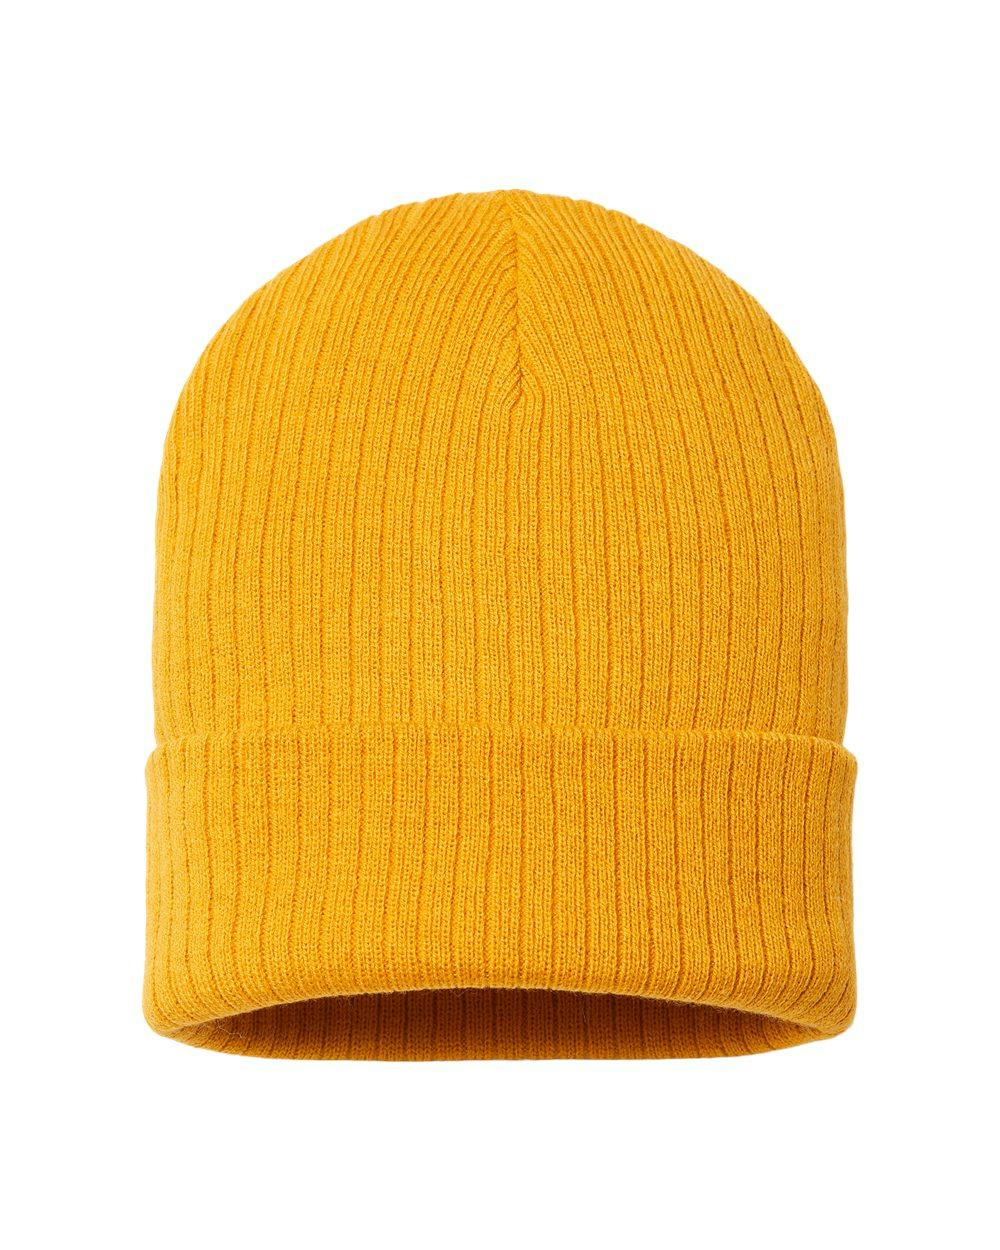 Image for Sustainable Rib Cuffed Beanie - RIO